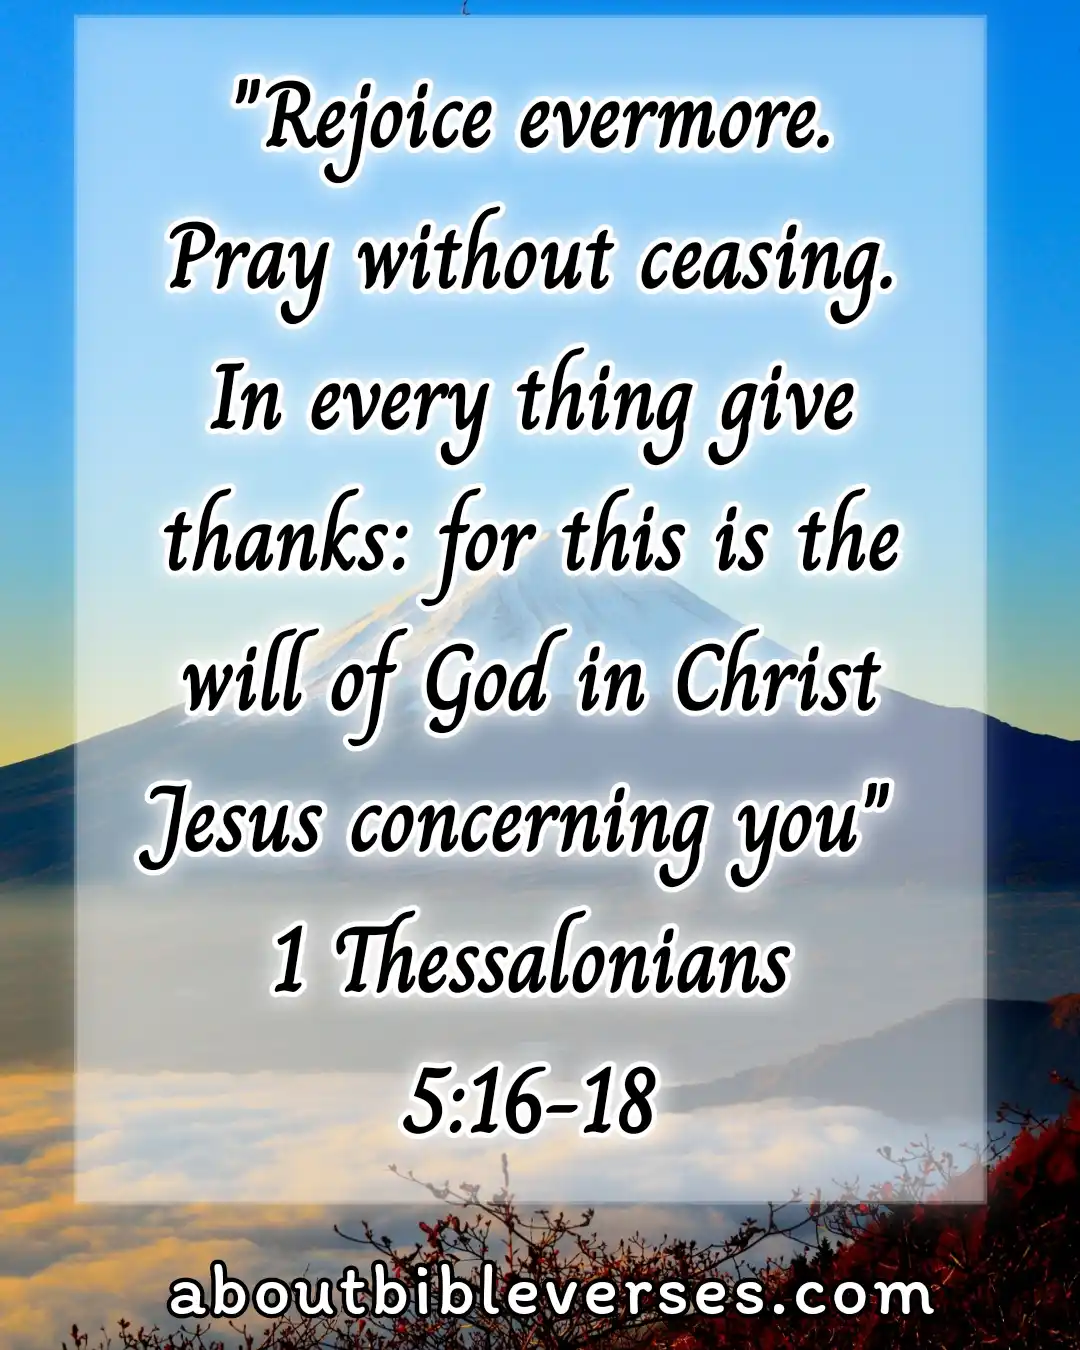 Today bible verse (1 Thessalonians 5:16-18)